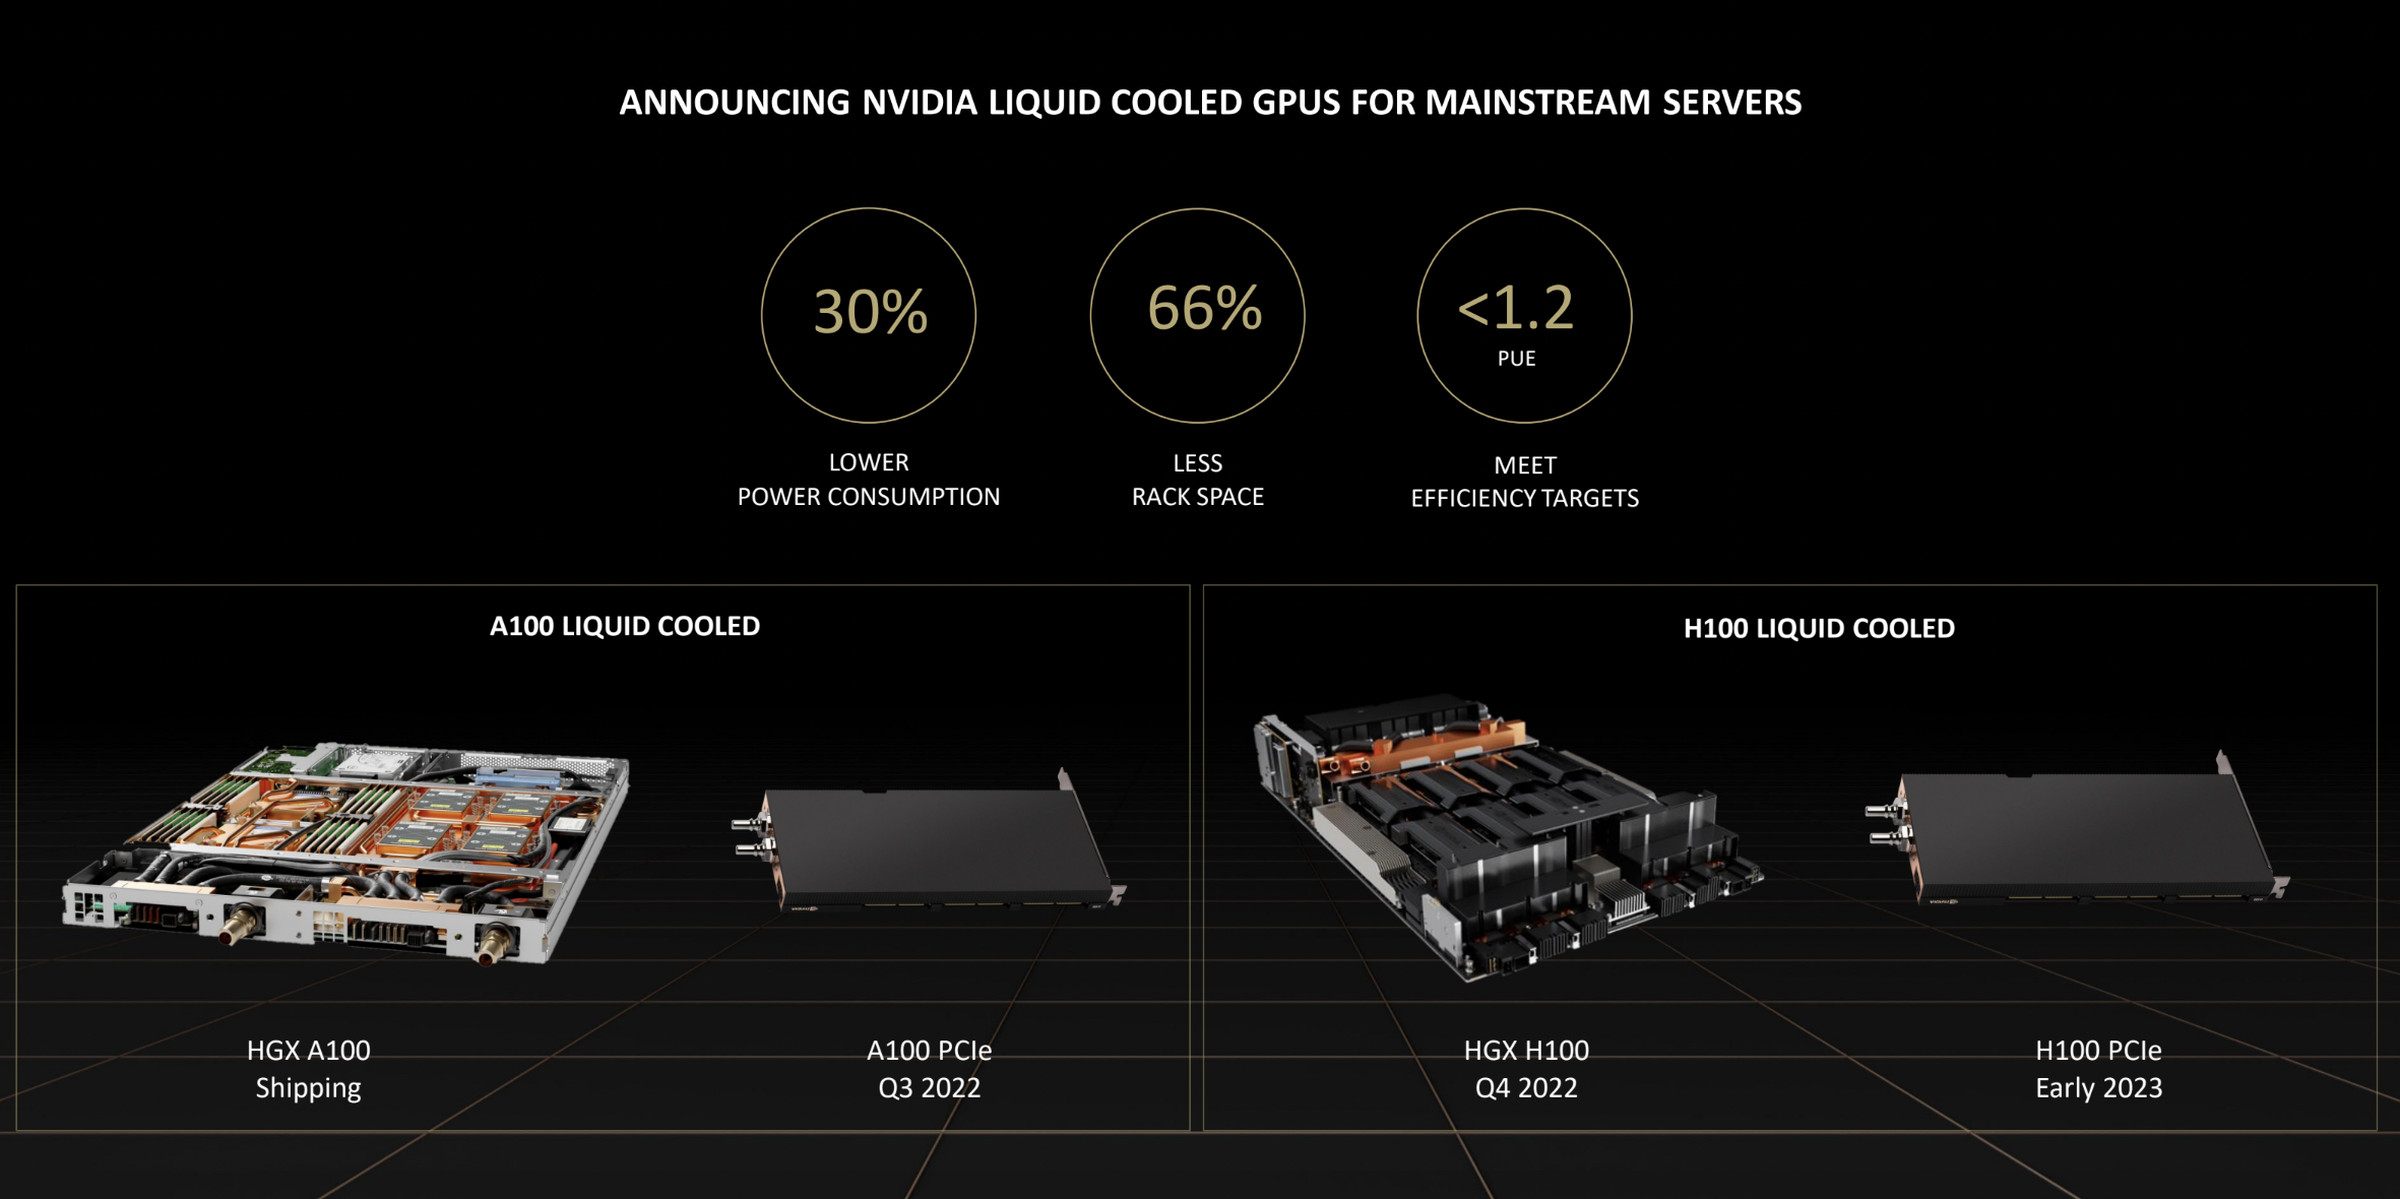 Nvidia’s roadmap for liquid cooled appliances and cards.